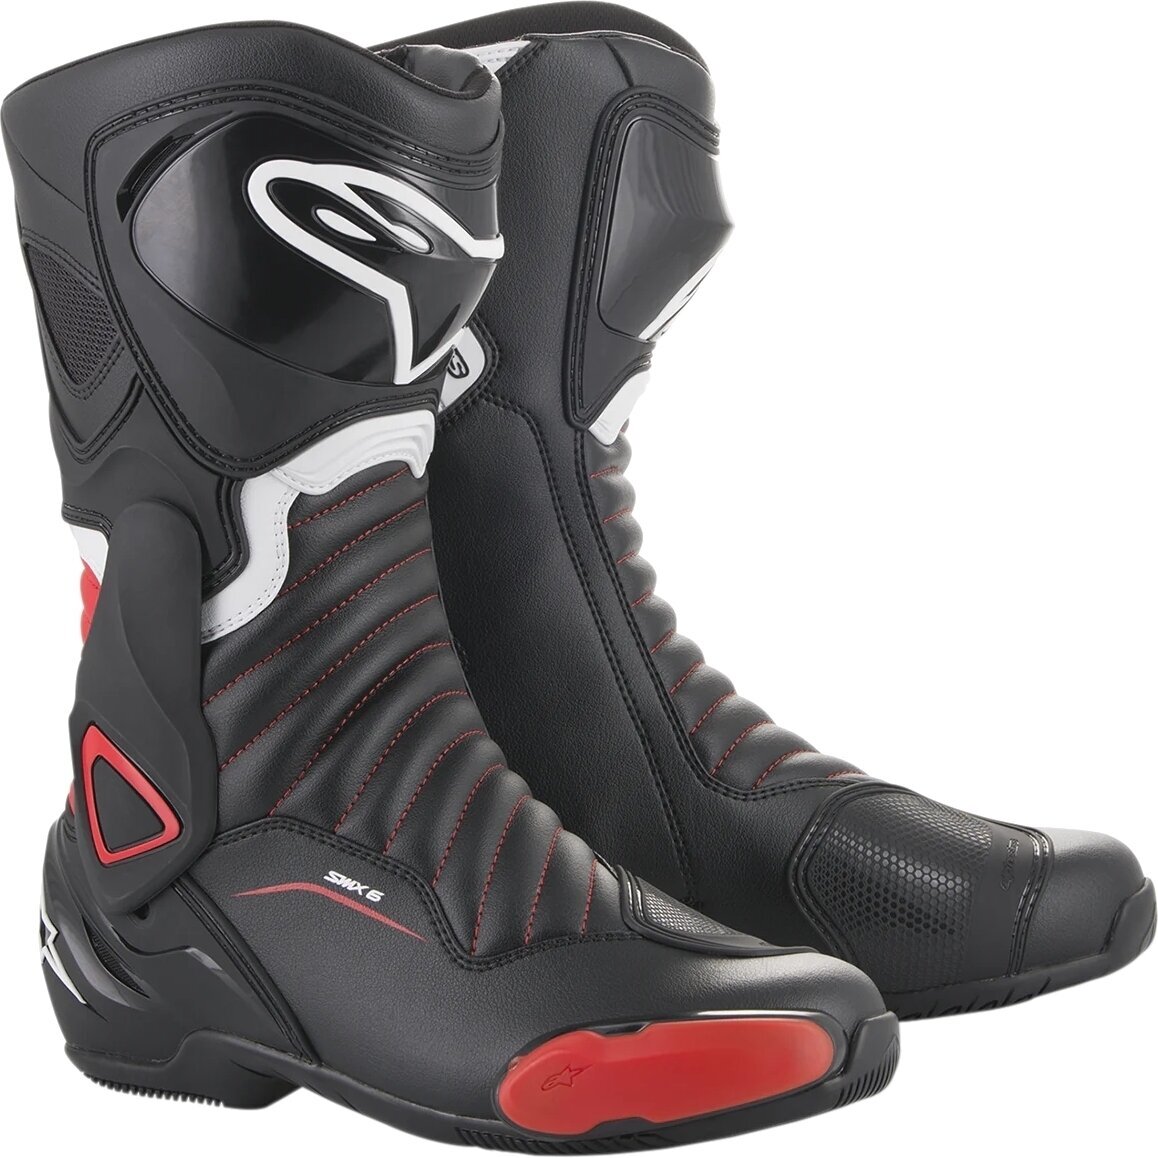 Motorcycle Boots Alpinestars SMX-6 V2 Boots Black/Gray/Red Fluo 45 Motorcycle Boots